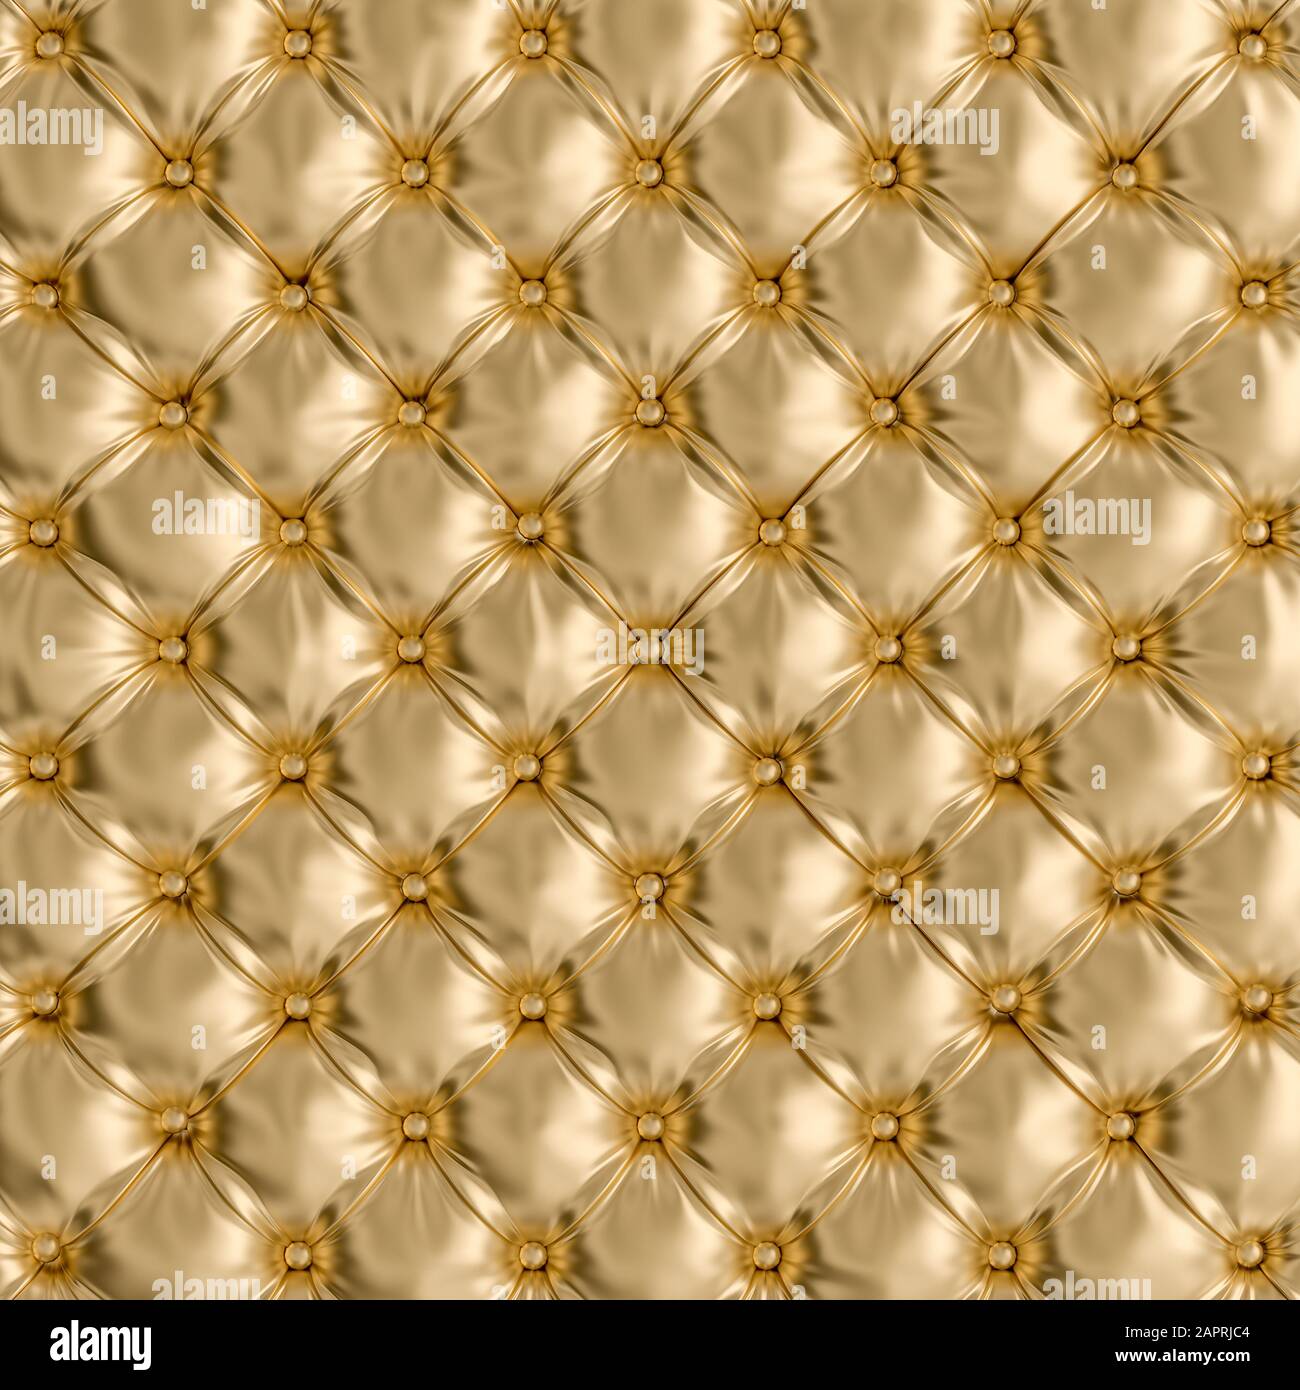 detail of gold colored sofa texture. 3d render image. retro and classic background. Concept of exclusivity and luxury. Stock Photo